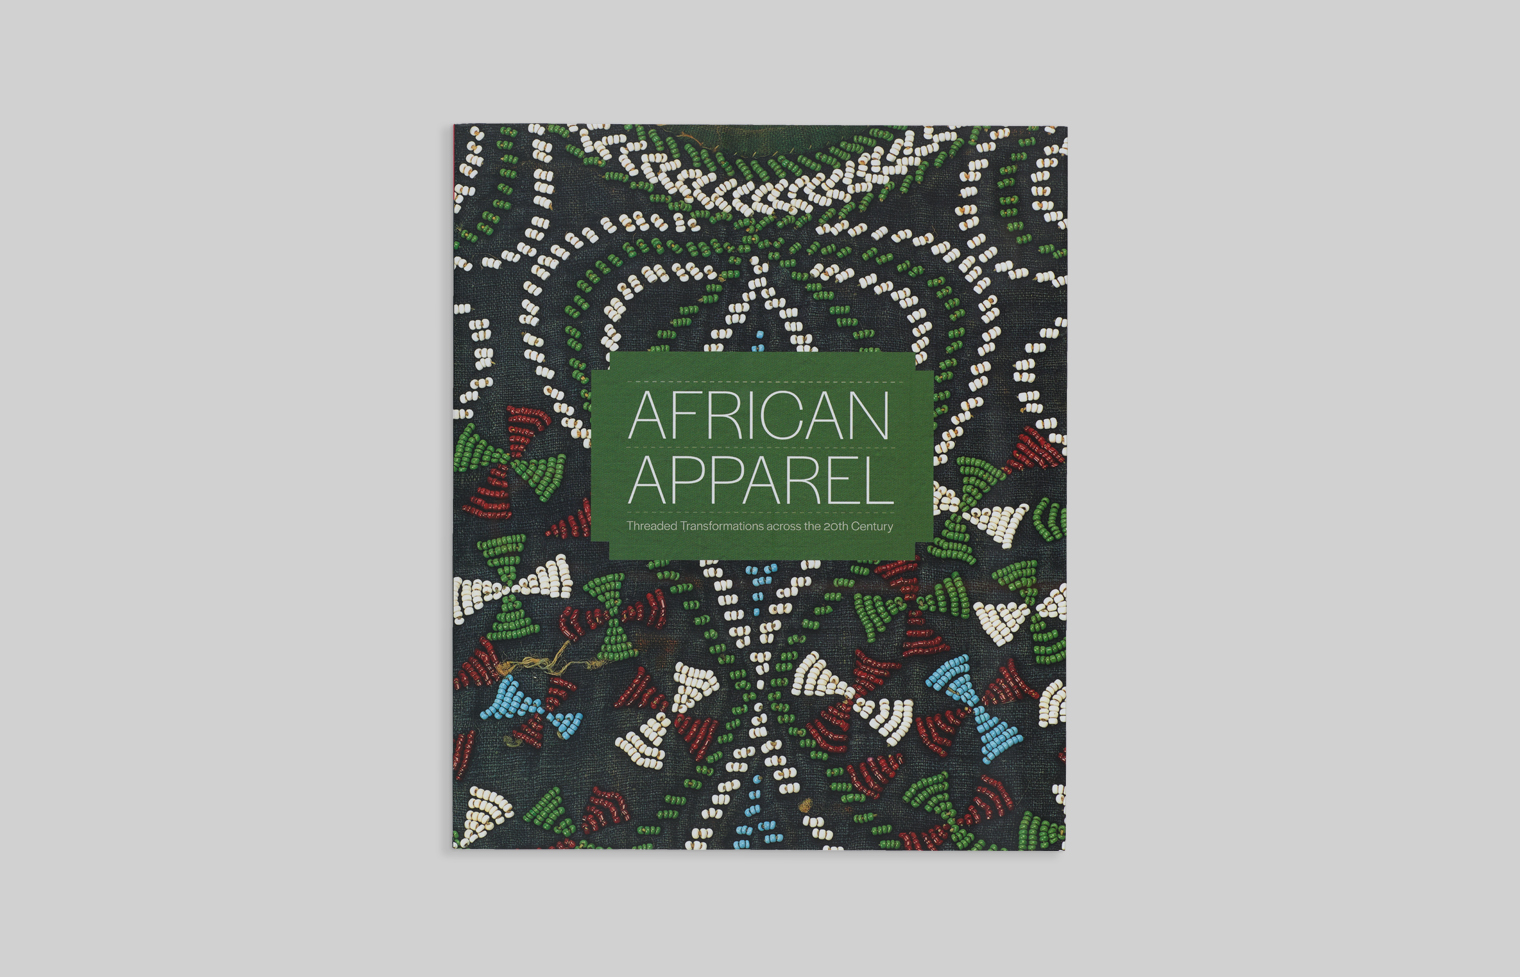 Exhibition catalogue cover features a detail from a beaded shirt from Bamileke, Cameroon.